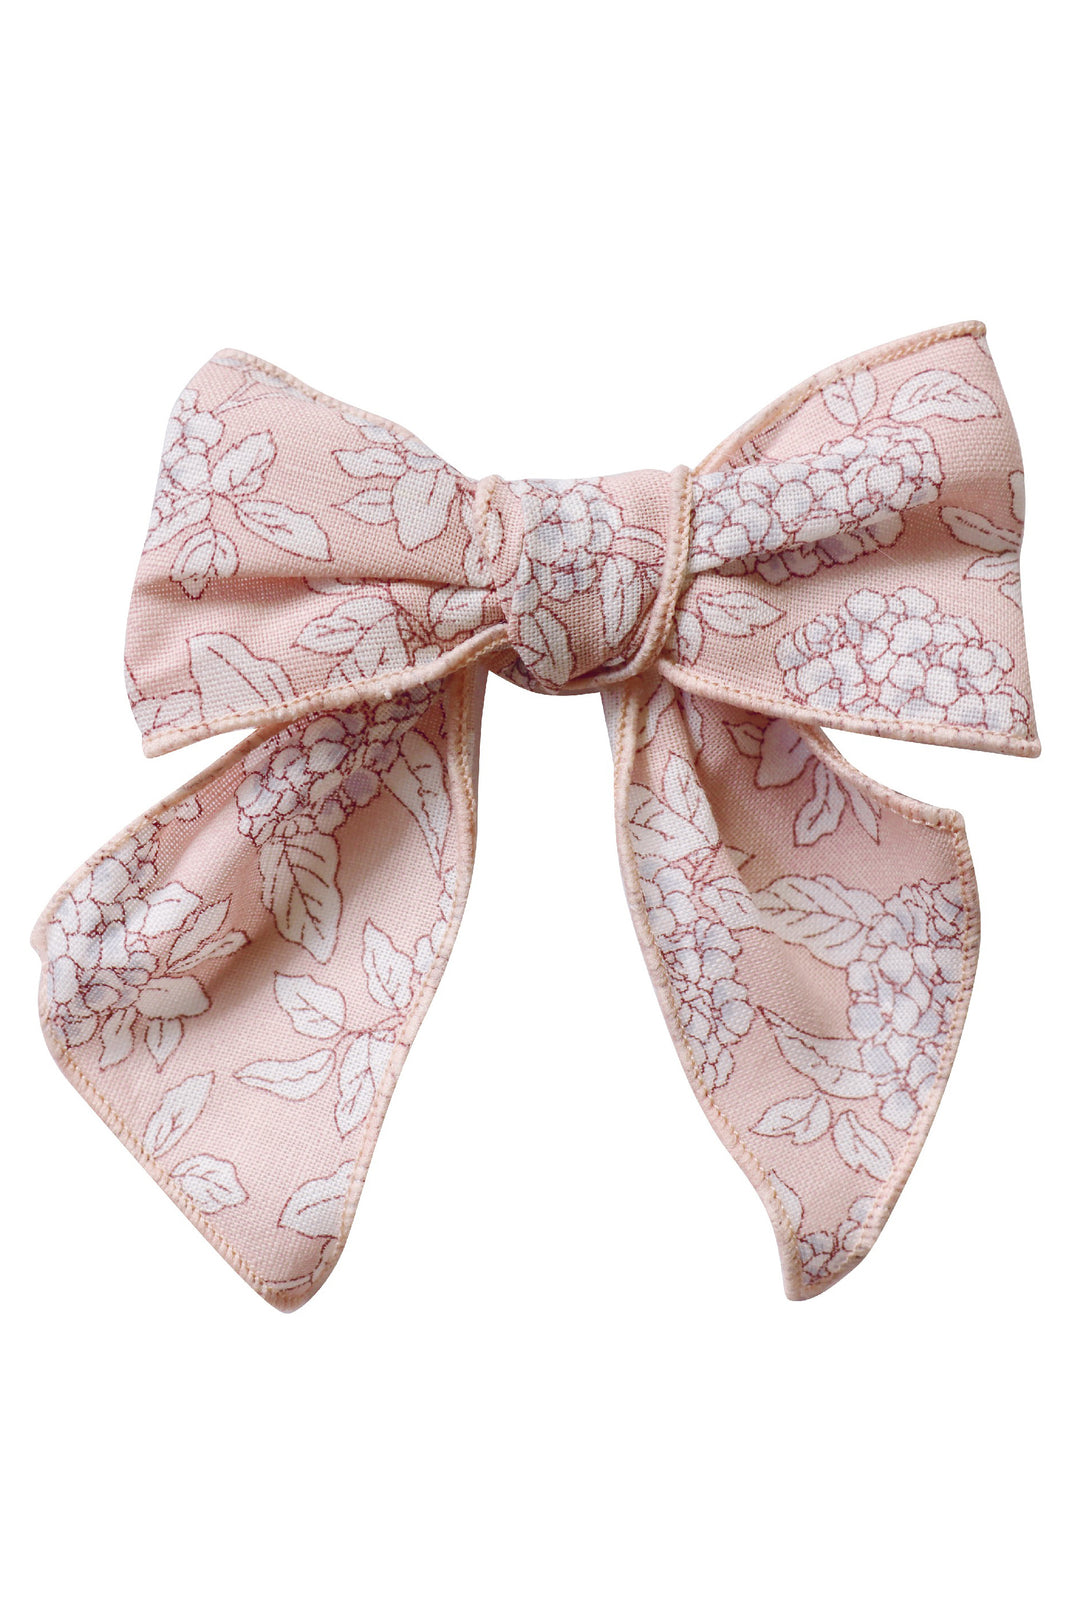 Calamaro Dusky Pink Floral Hair Bow | iphoneandroidapplications